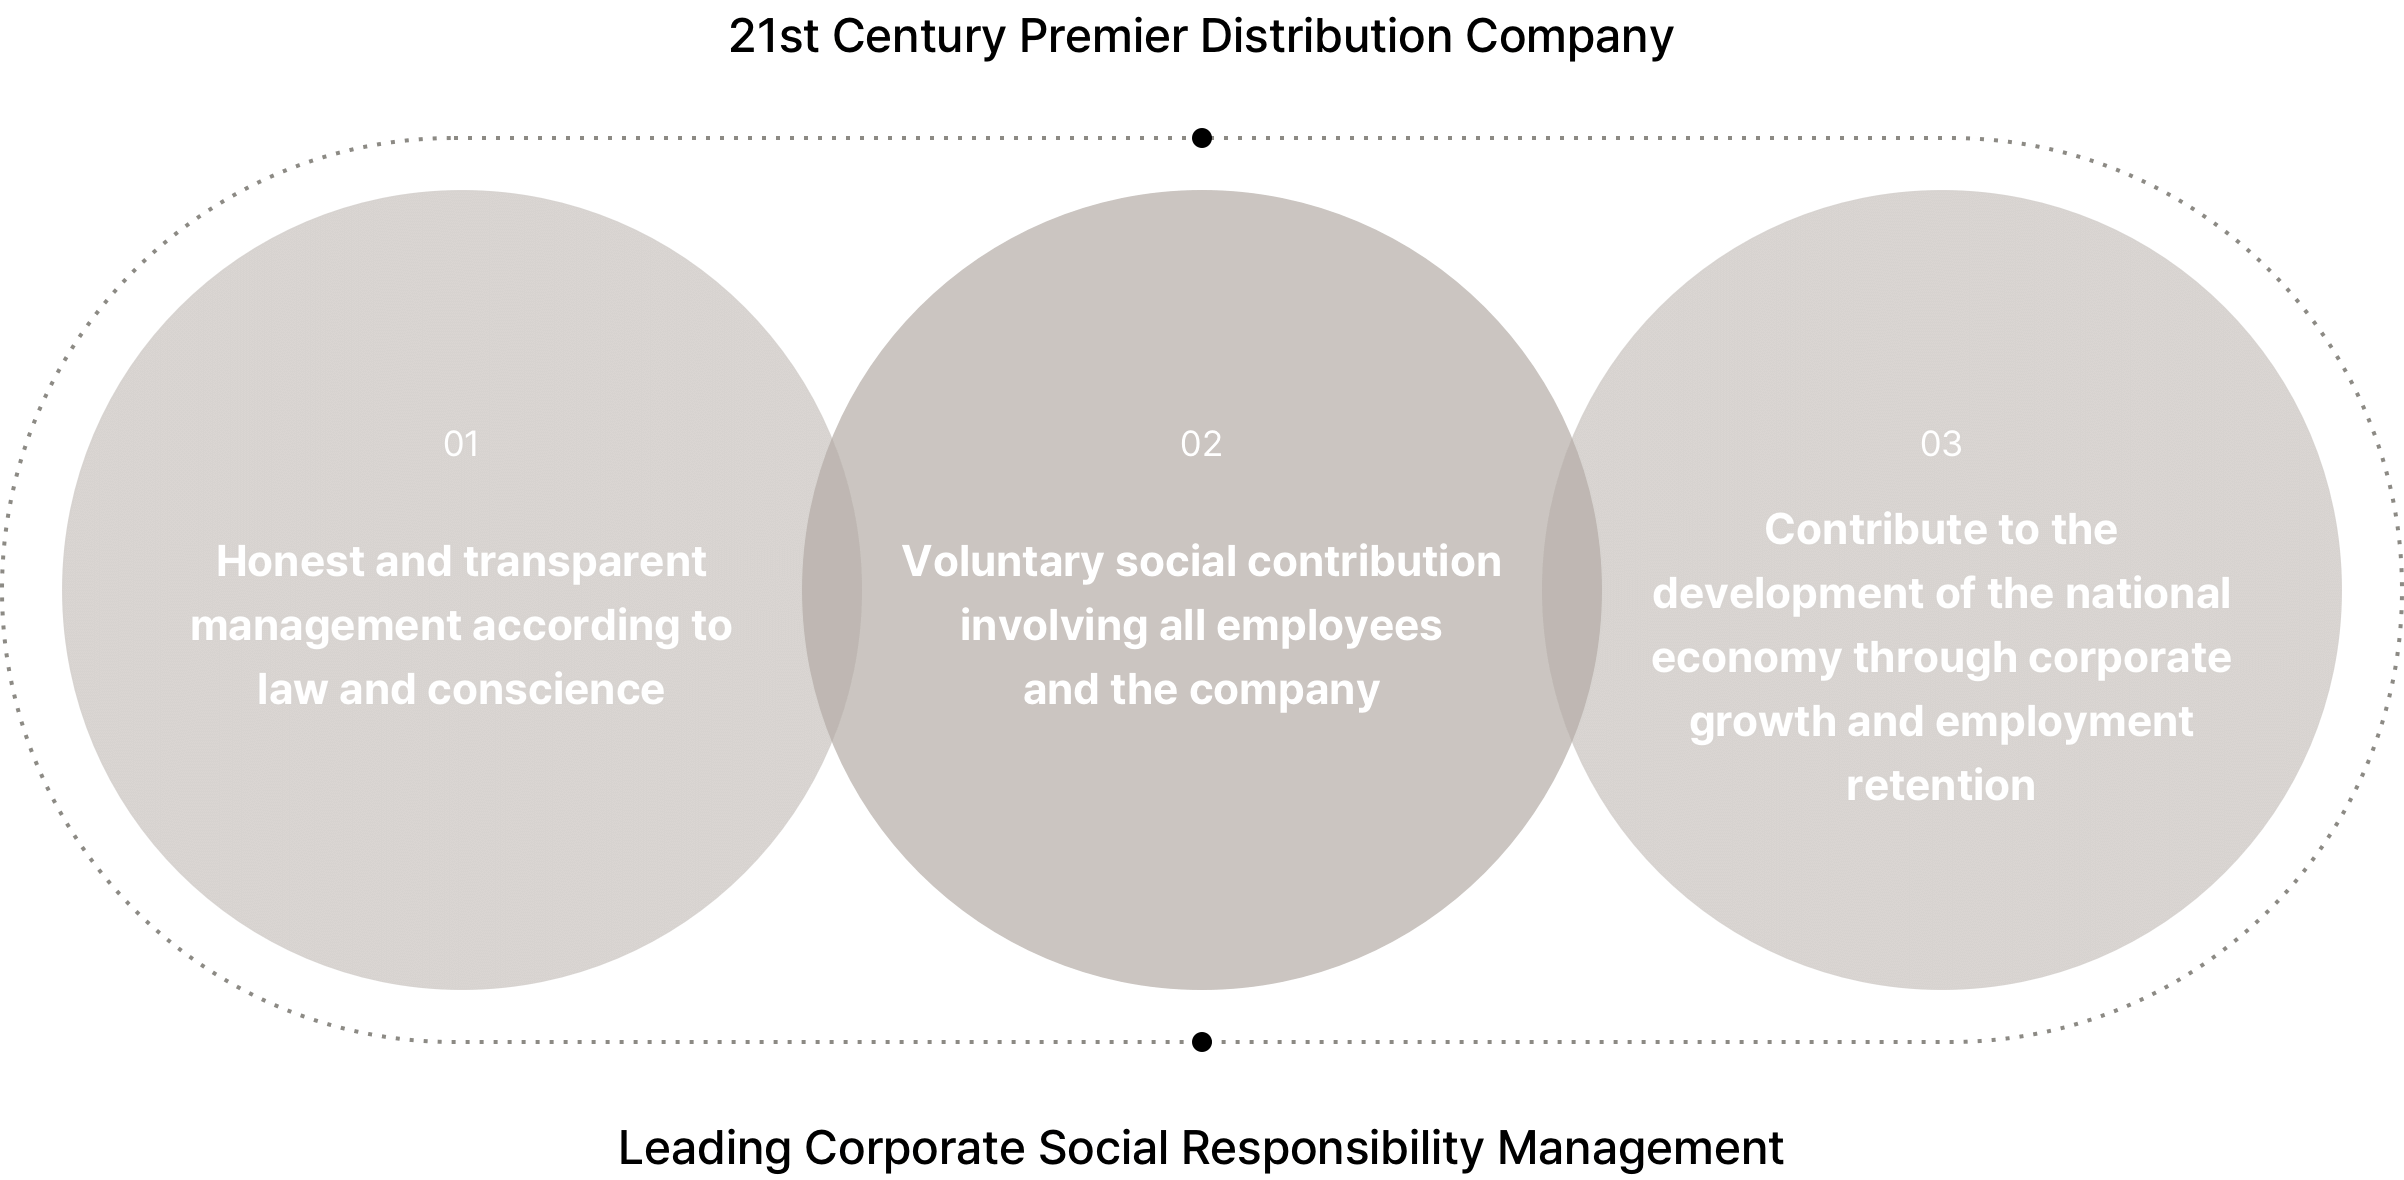 21st Century Premier Distribution Company/01 Honest and transparent management according to law and conscience/02 Voluntary social contribution involving all employees and the company/03 Contribute to the development of the national economy through corporate growth and employment retention